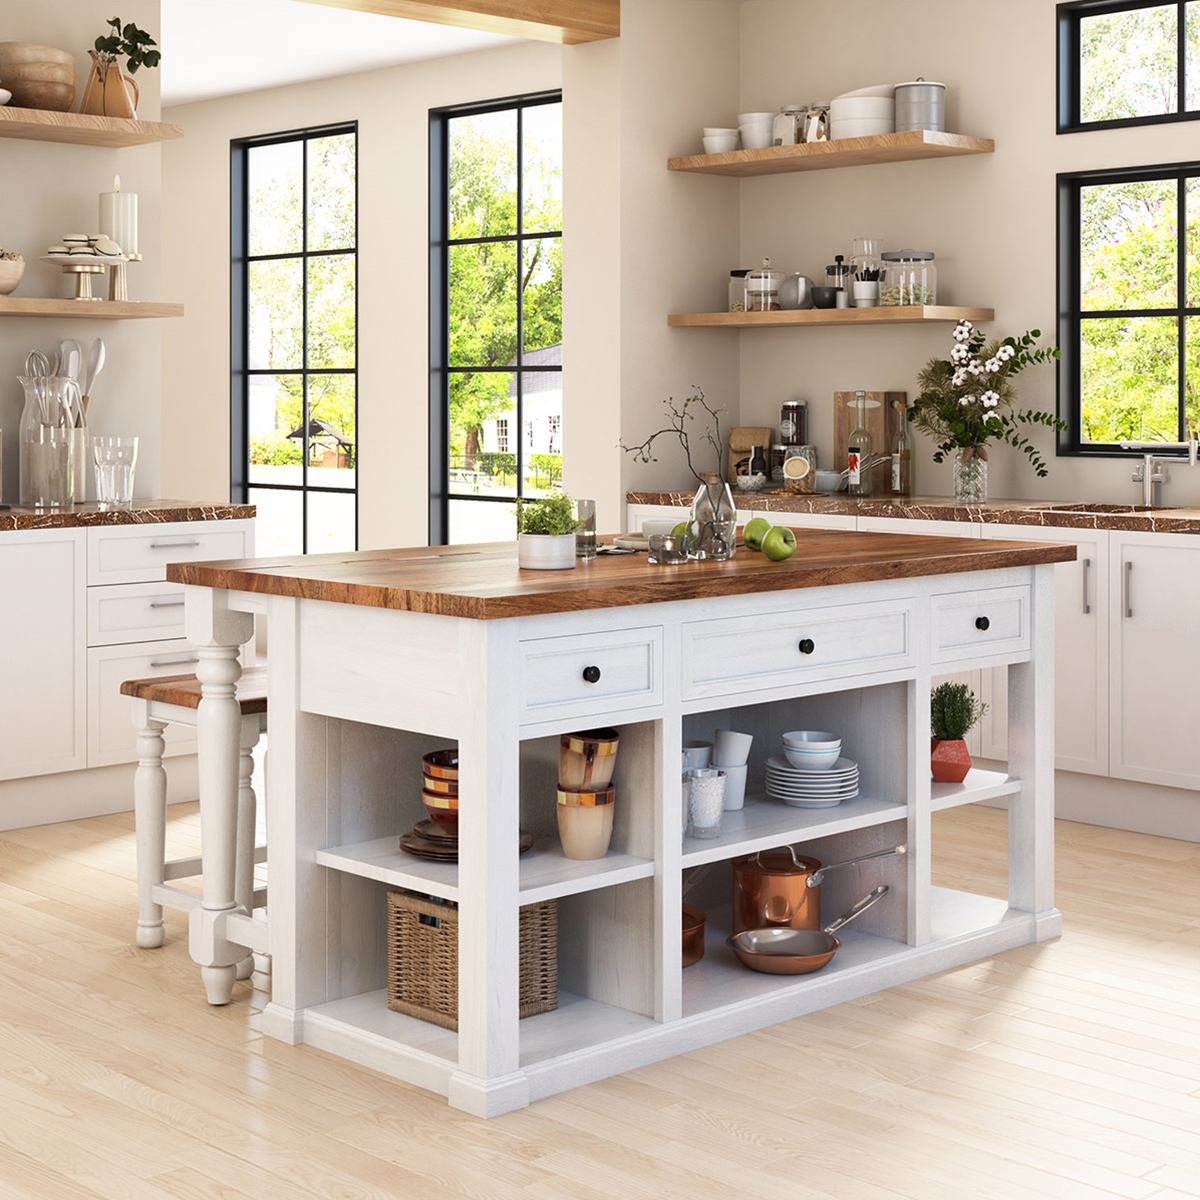 Rhinebeck Rustic Farmhouse Kitchen Island with Seating and Storage.